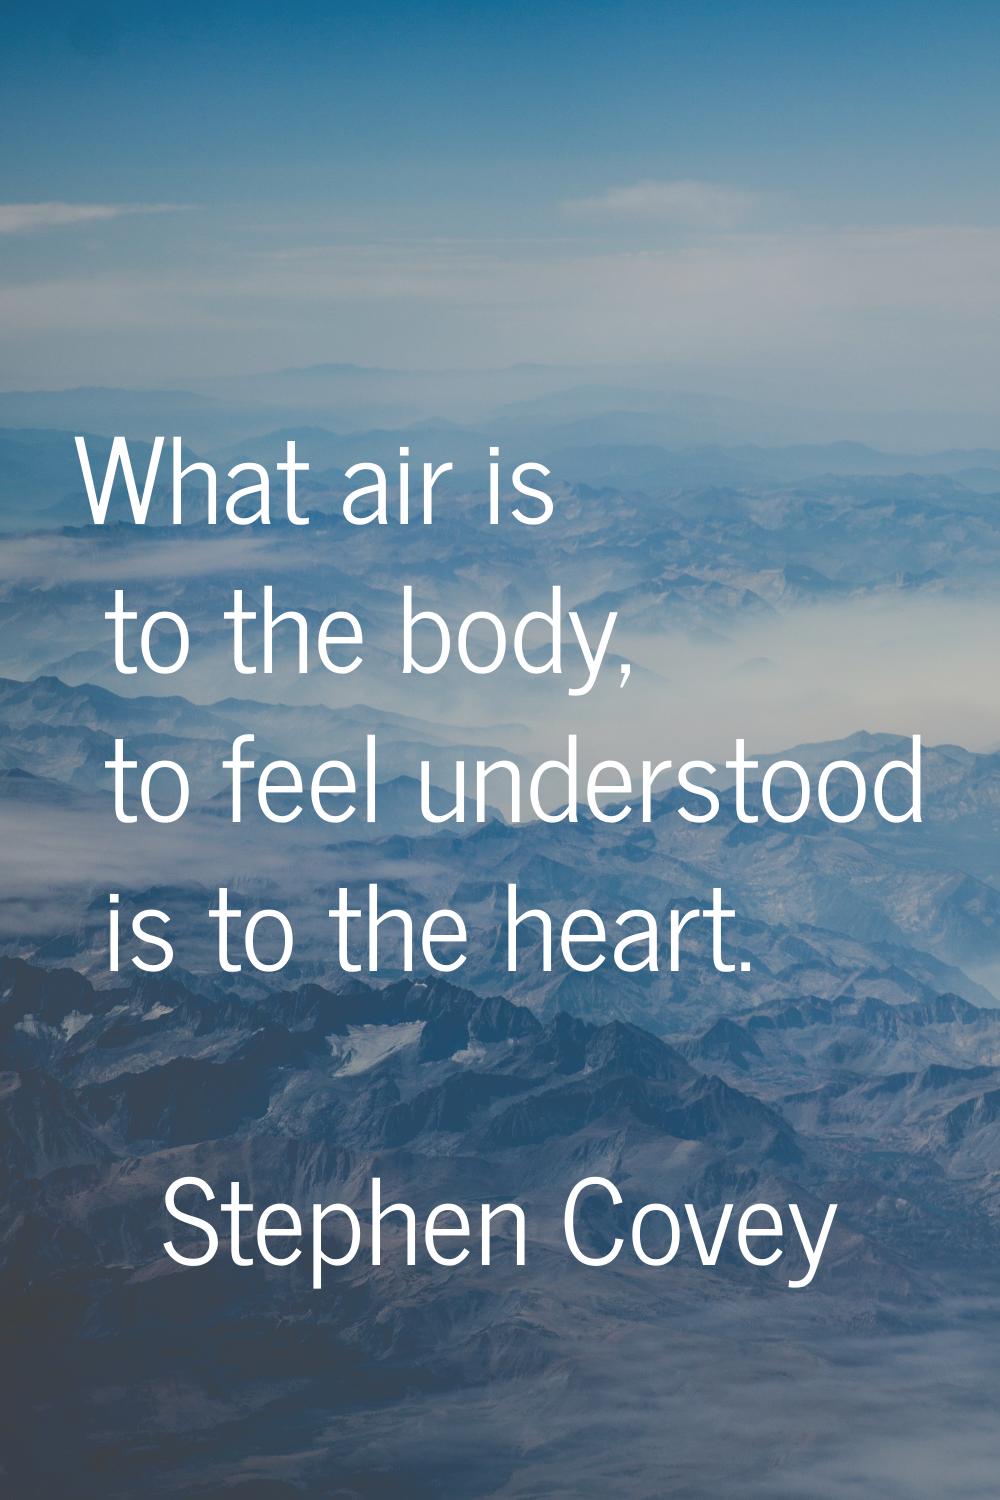 What air is to the body, to feel understood is to the heart.